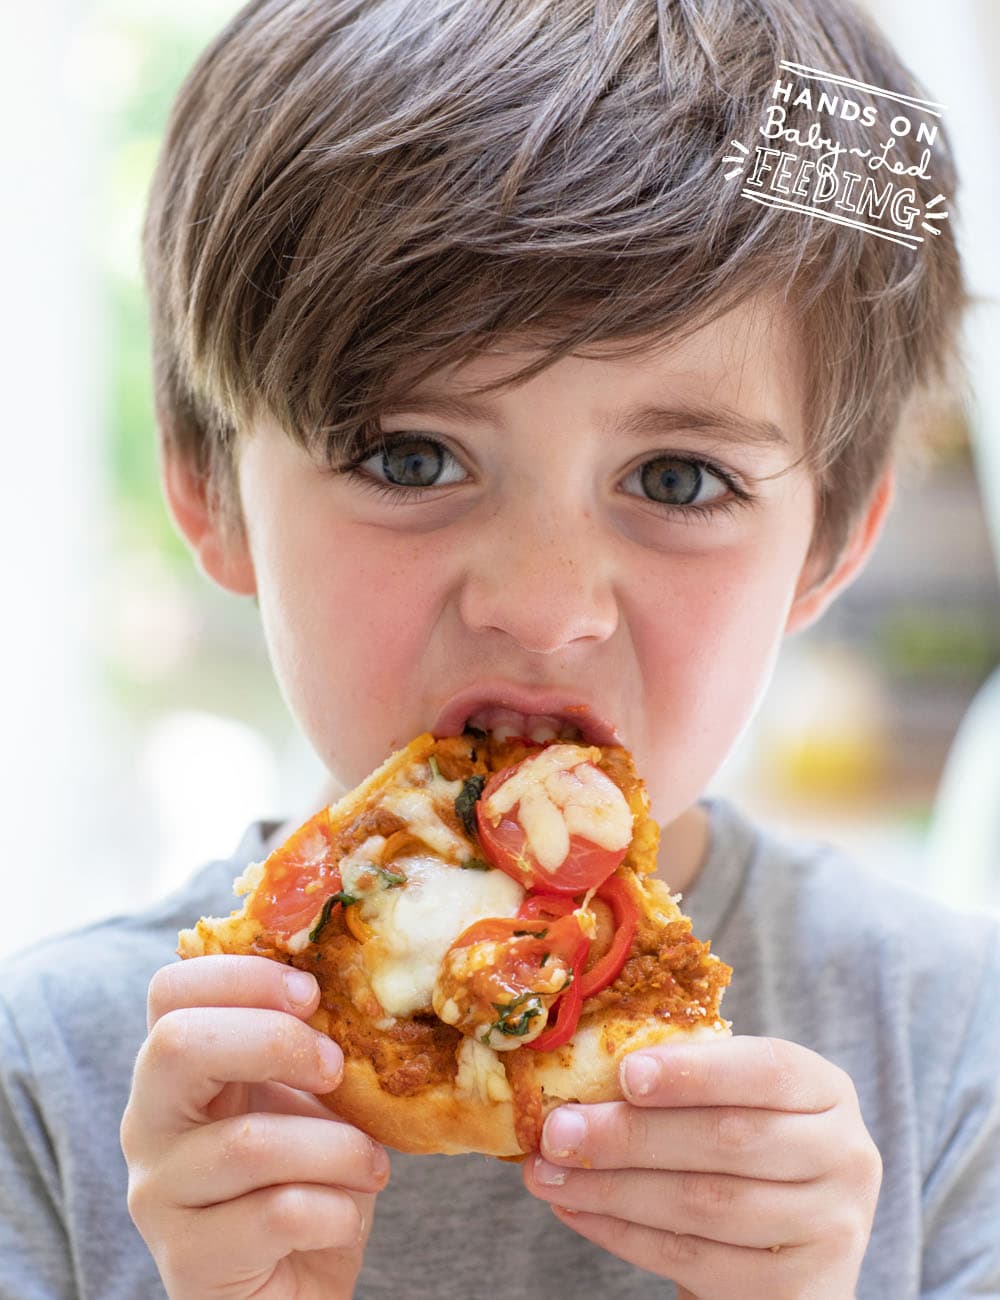 Juicy tomatoes and fresh sweet peppers give this healthy pizza a lightly sweet bite making it great for younger palates. Picky eater vegetable pizza is a family friendly nutritious recipe that only takes 10 minutes! #babyledweaning #pickyeater #toddlerfood #pizza #familyfood #refinedsugarfree 